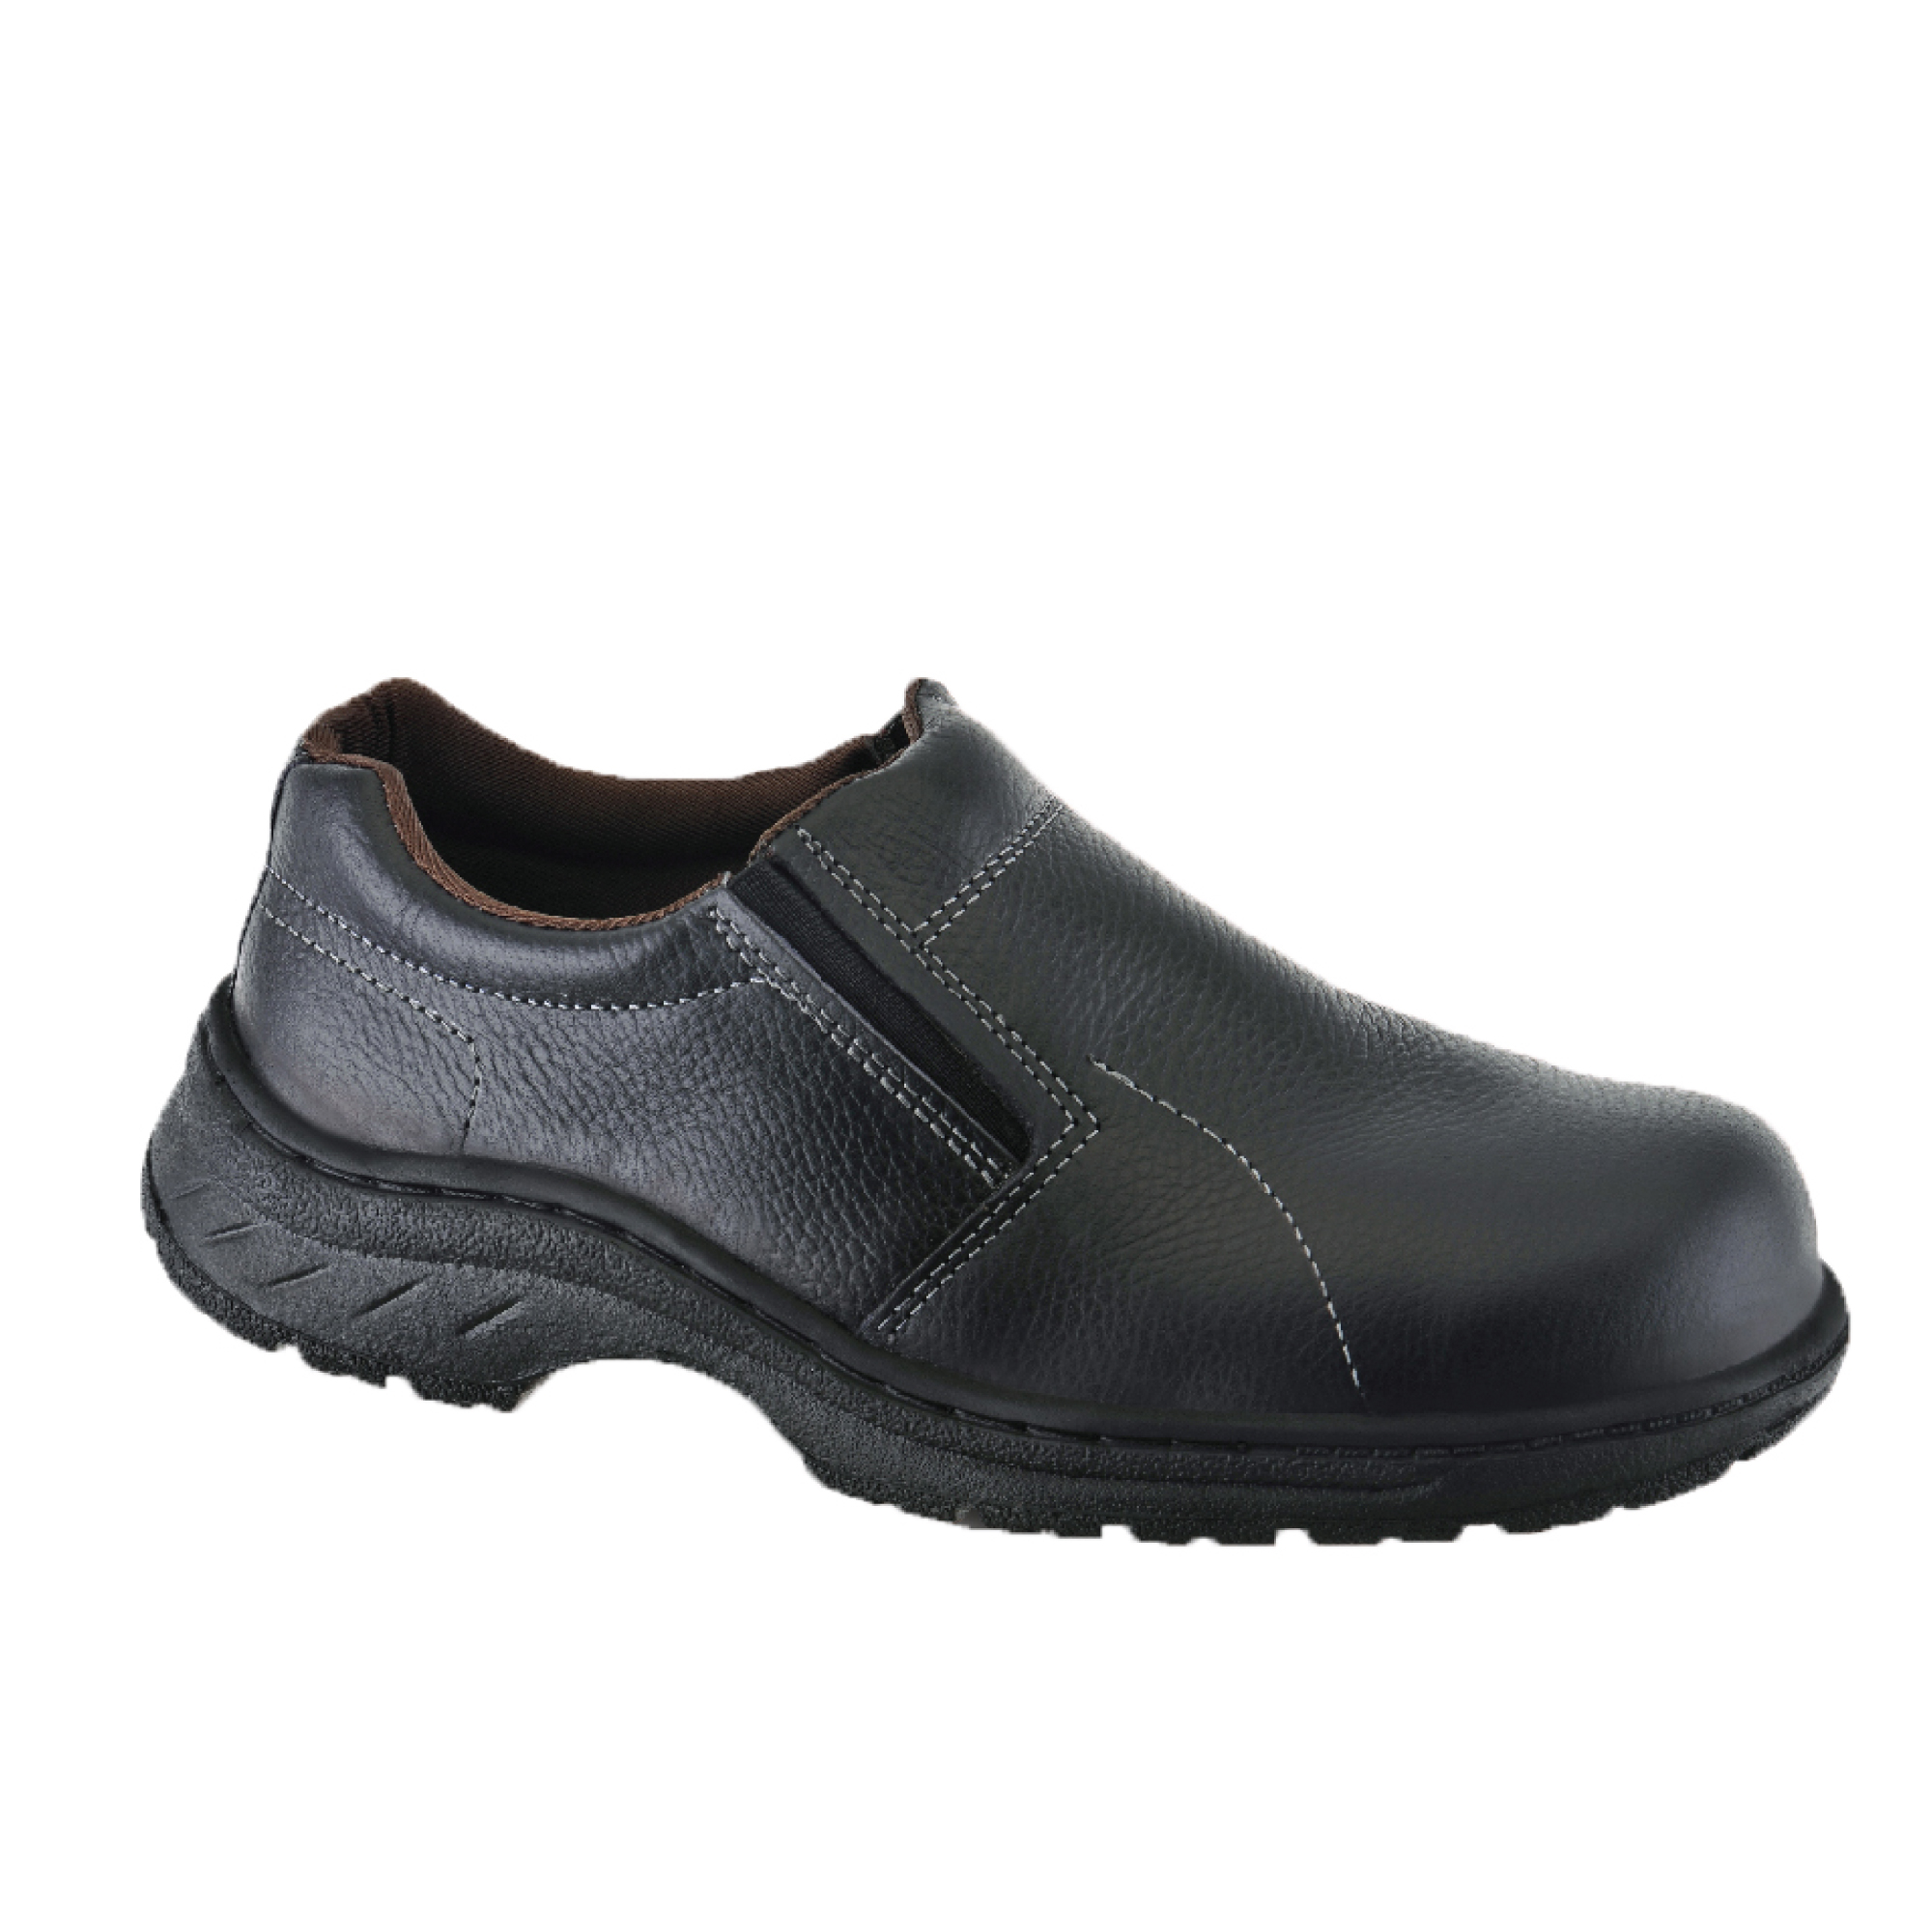 M98801-11 Safety Shoes